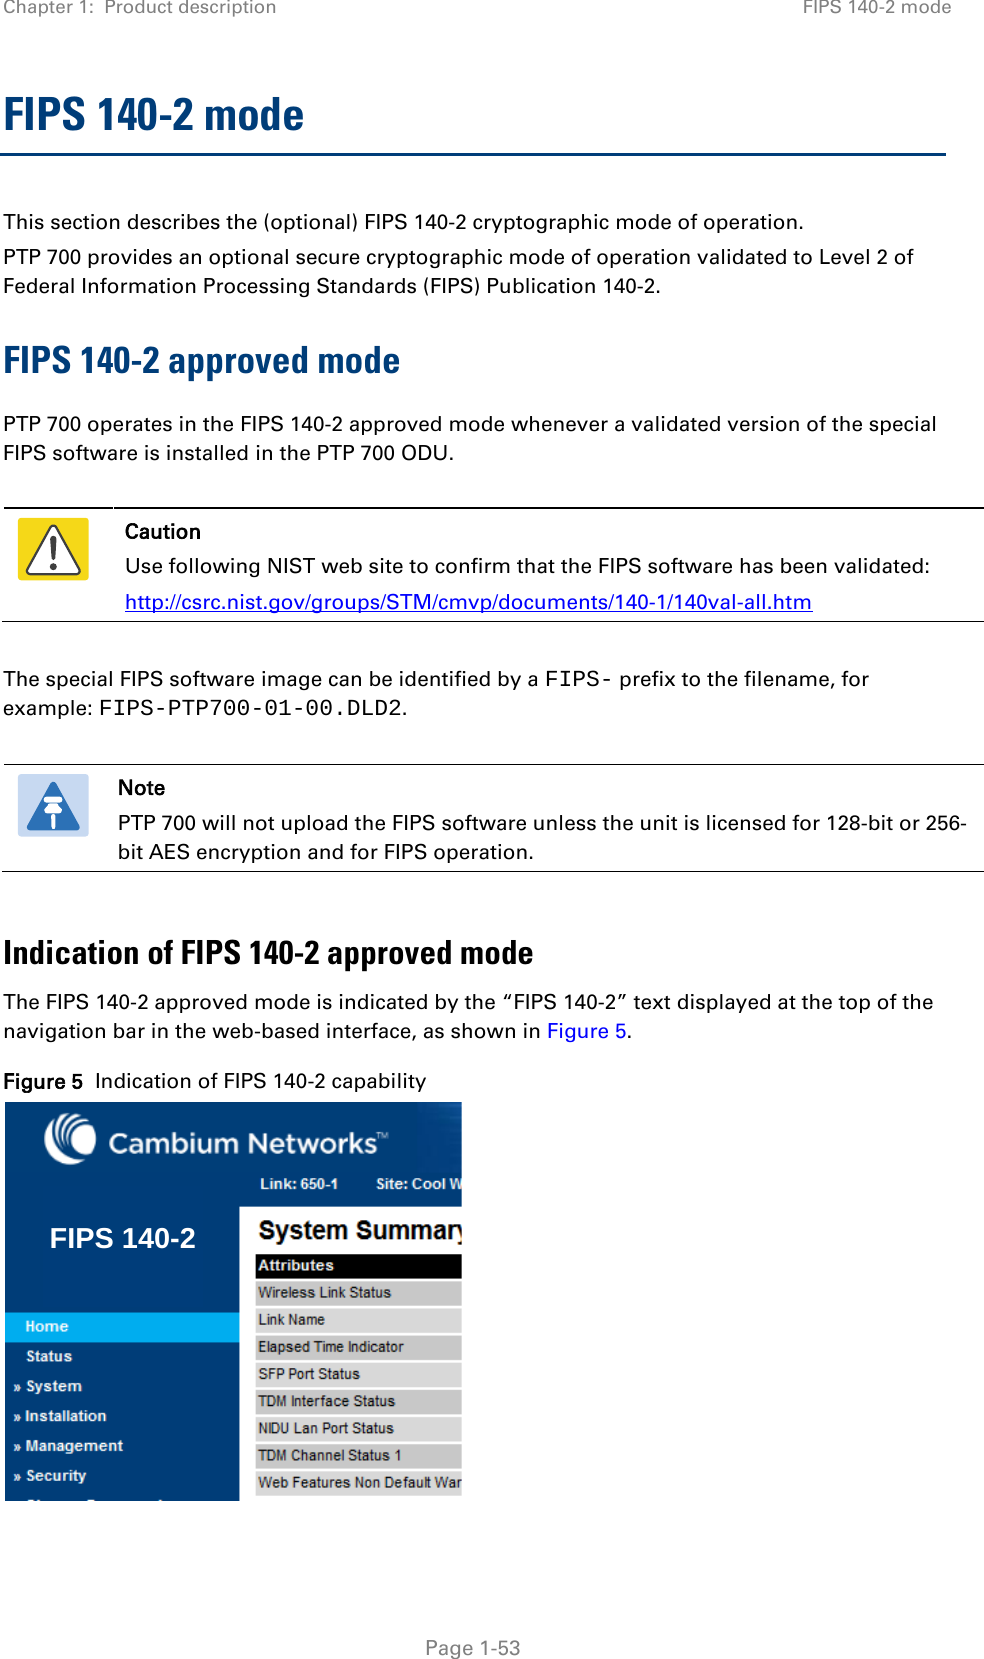 Chapter 1:  Product description FIPS 140-2 mode  FIPS 140-2 mode This section describes the (optional) FIPS 140-2 cryptographic mode of operation. PTP 700 provides an optional secure cryptographic mode of operation validated to Level 2 of Federal Information Processing Standards (FIPS) Publication 140-2. FIPS 140-2 approved mode PTP 700 operates in the FIPS 140-2 approved mode whenever a validated version of the special FIPS software is installed in the PTP 700 ODU.   Caution Use following NIST web site to confirm that the FIPS software has been validated: http://csrc.nist.gov/groups/STM/cmvp/documents/140-1/140val-all.htm  The special FIPS software image can be identified by a FIPS- prefix to the filename, for example: FIPS-PTP700-01-00.DLD2.   Note PTP 700 will not upload the FIPS software unless the unit is licensed for 128-bit or 256-bit AES encryption and for FIPS operation.  Indication of FIPS 140-2 approved mode The FIPS 140-2 approved mode is indicated by the “FIPS 140-2” text displayed at the top of the navigation bar in the web-based interface, as shown in Figure 5. Figure 5  Indication of FIPS 140-2 capability  FIPS 140-2 Page 1-53 